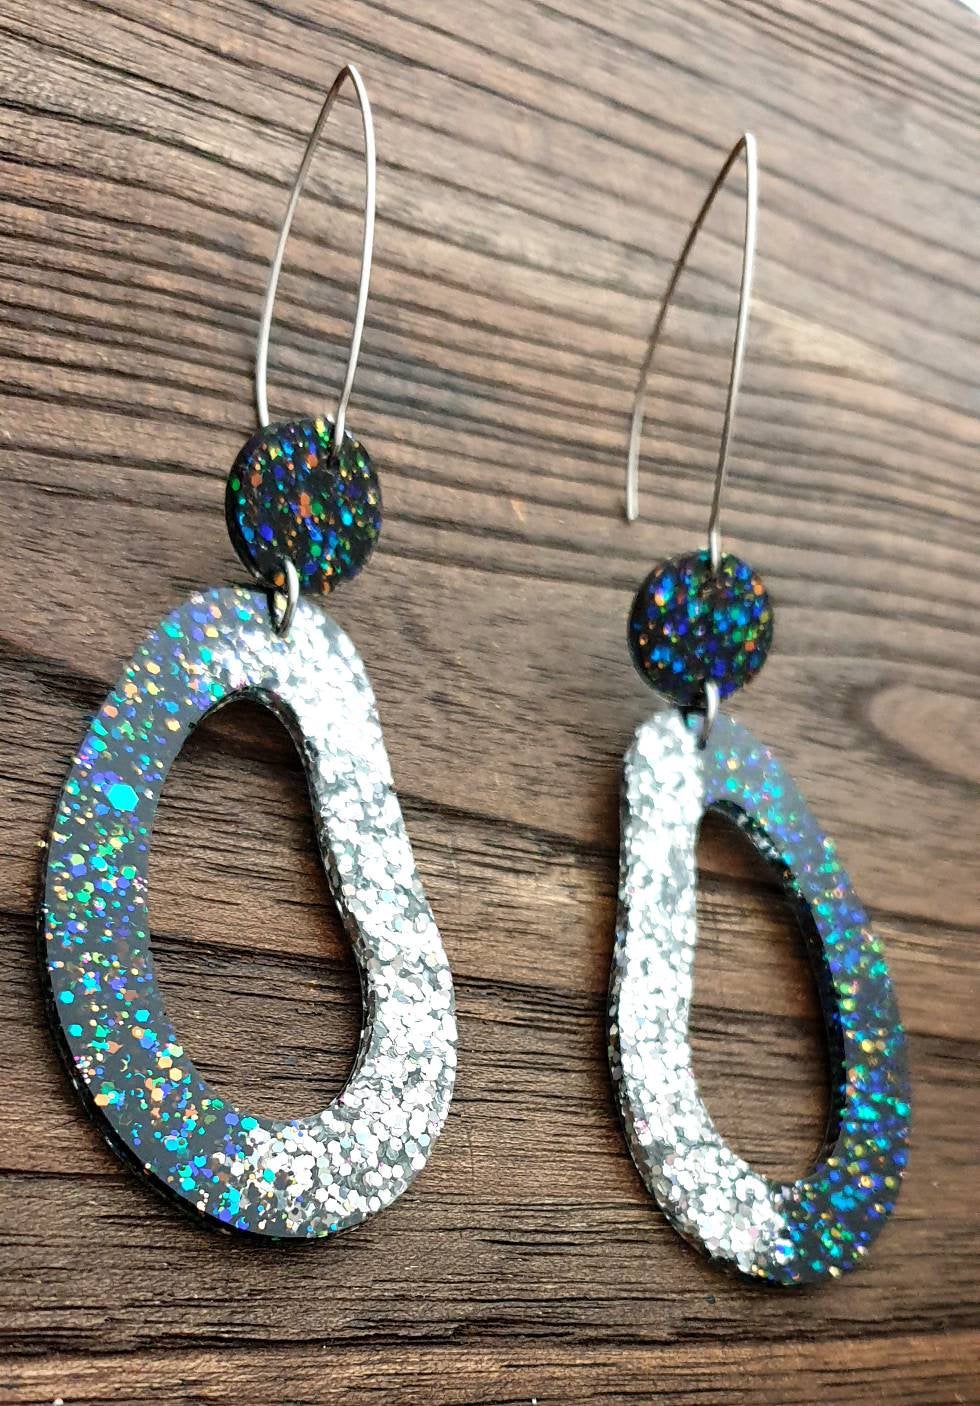 Large Unique Oval Design Long Dangle Earrings, Black Rainbow Silver Holographic Glitter Resin Dangle Statement Earrings